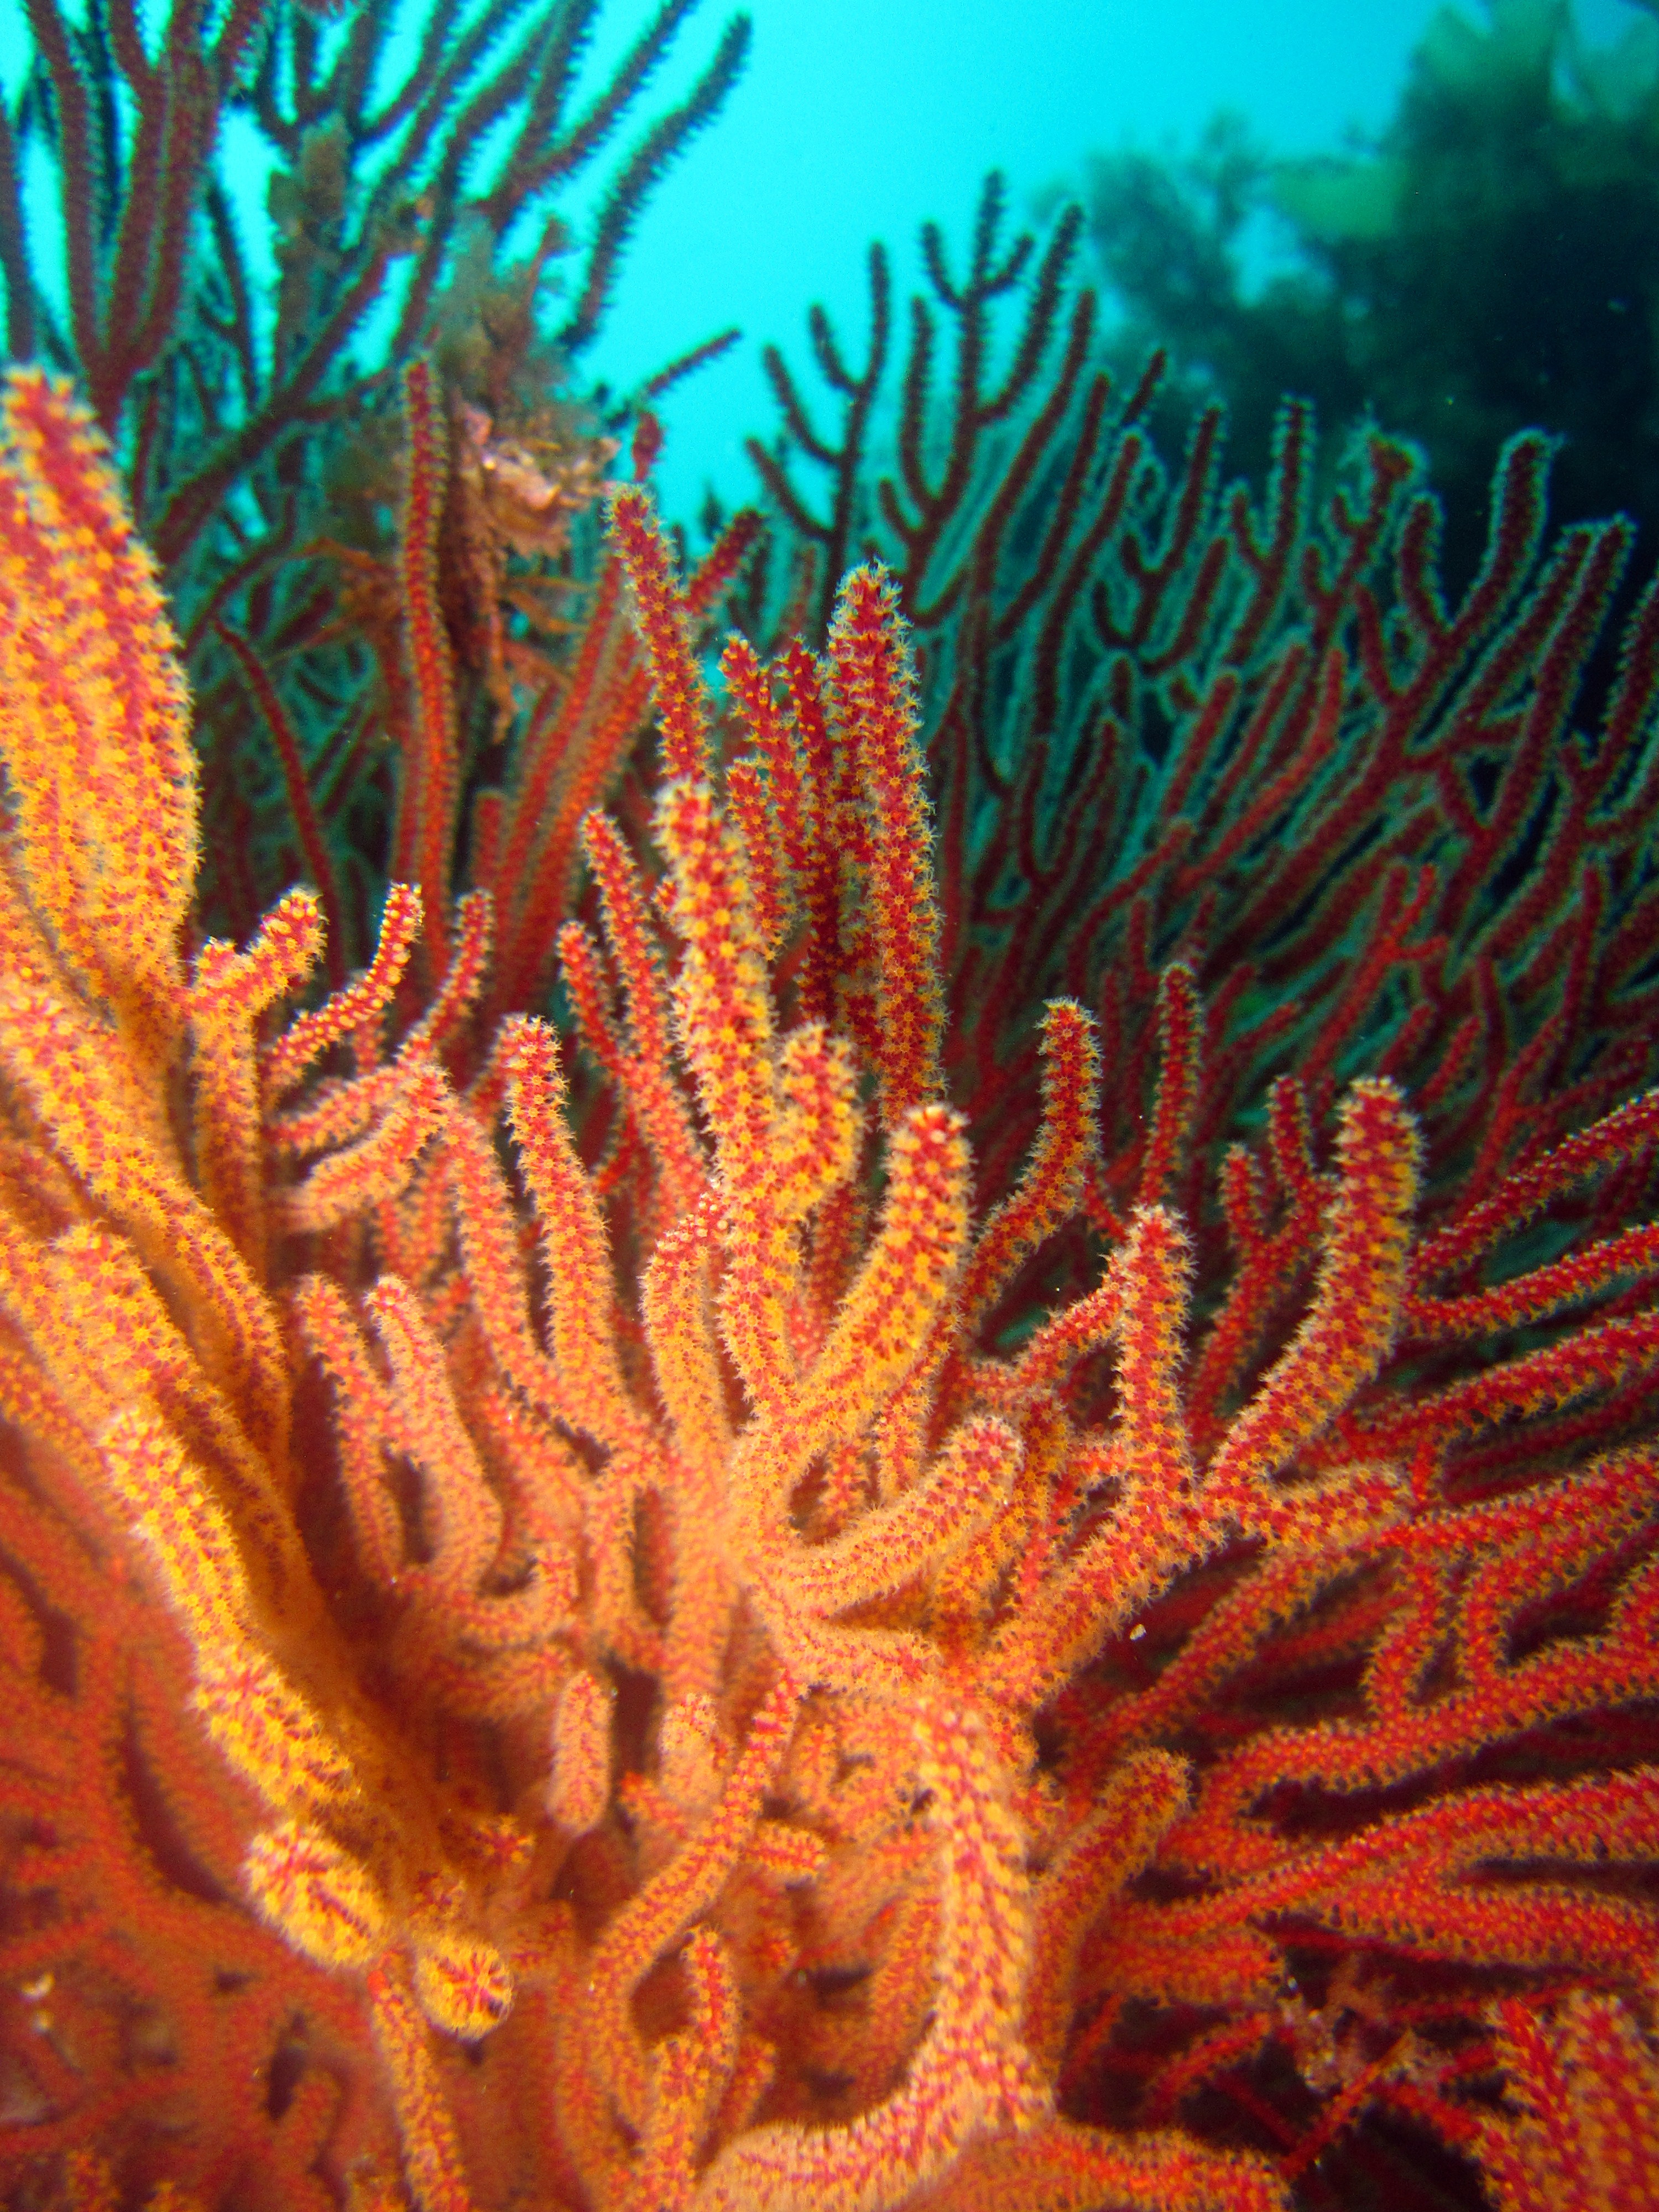 Bright orange coral with yellow protrusions under water.